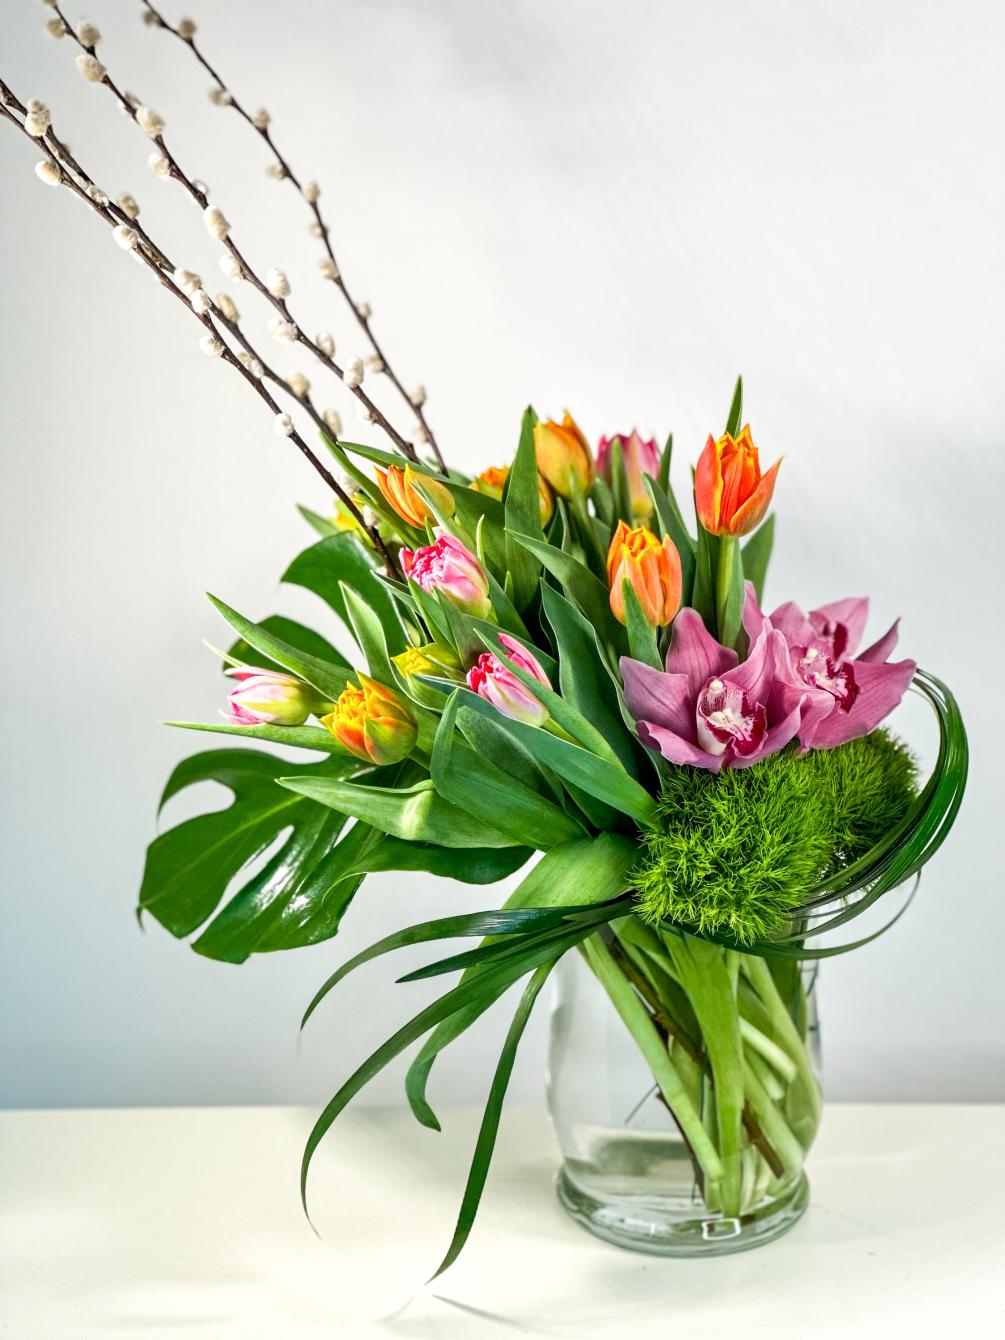 Playful combination of Tulips, Green Trick, and Cymbidium Orchid in a glass